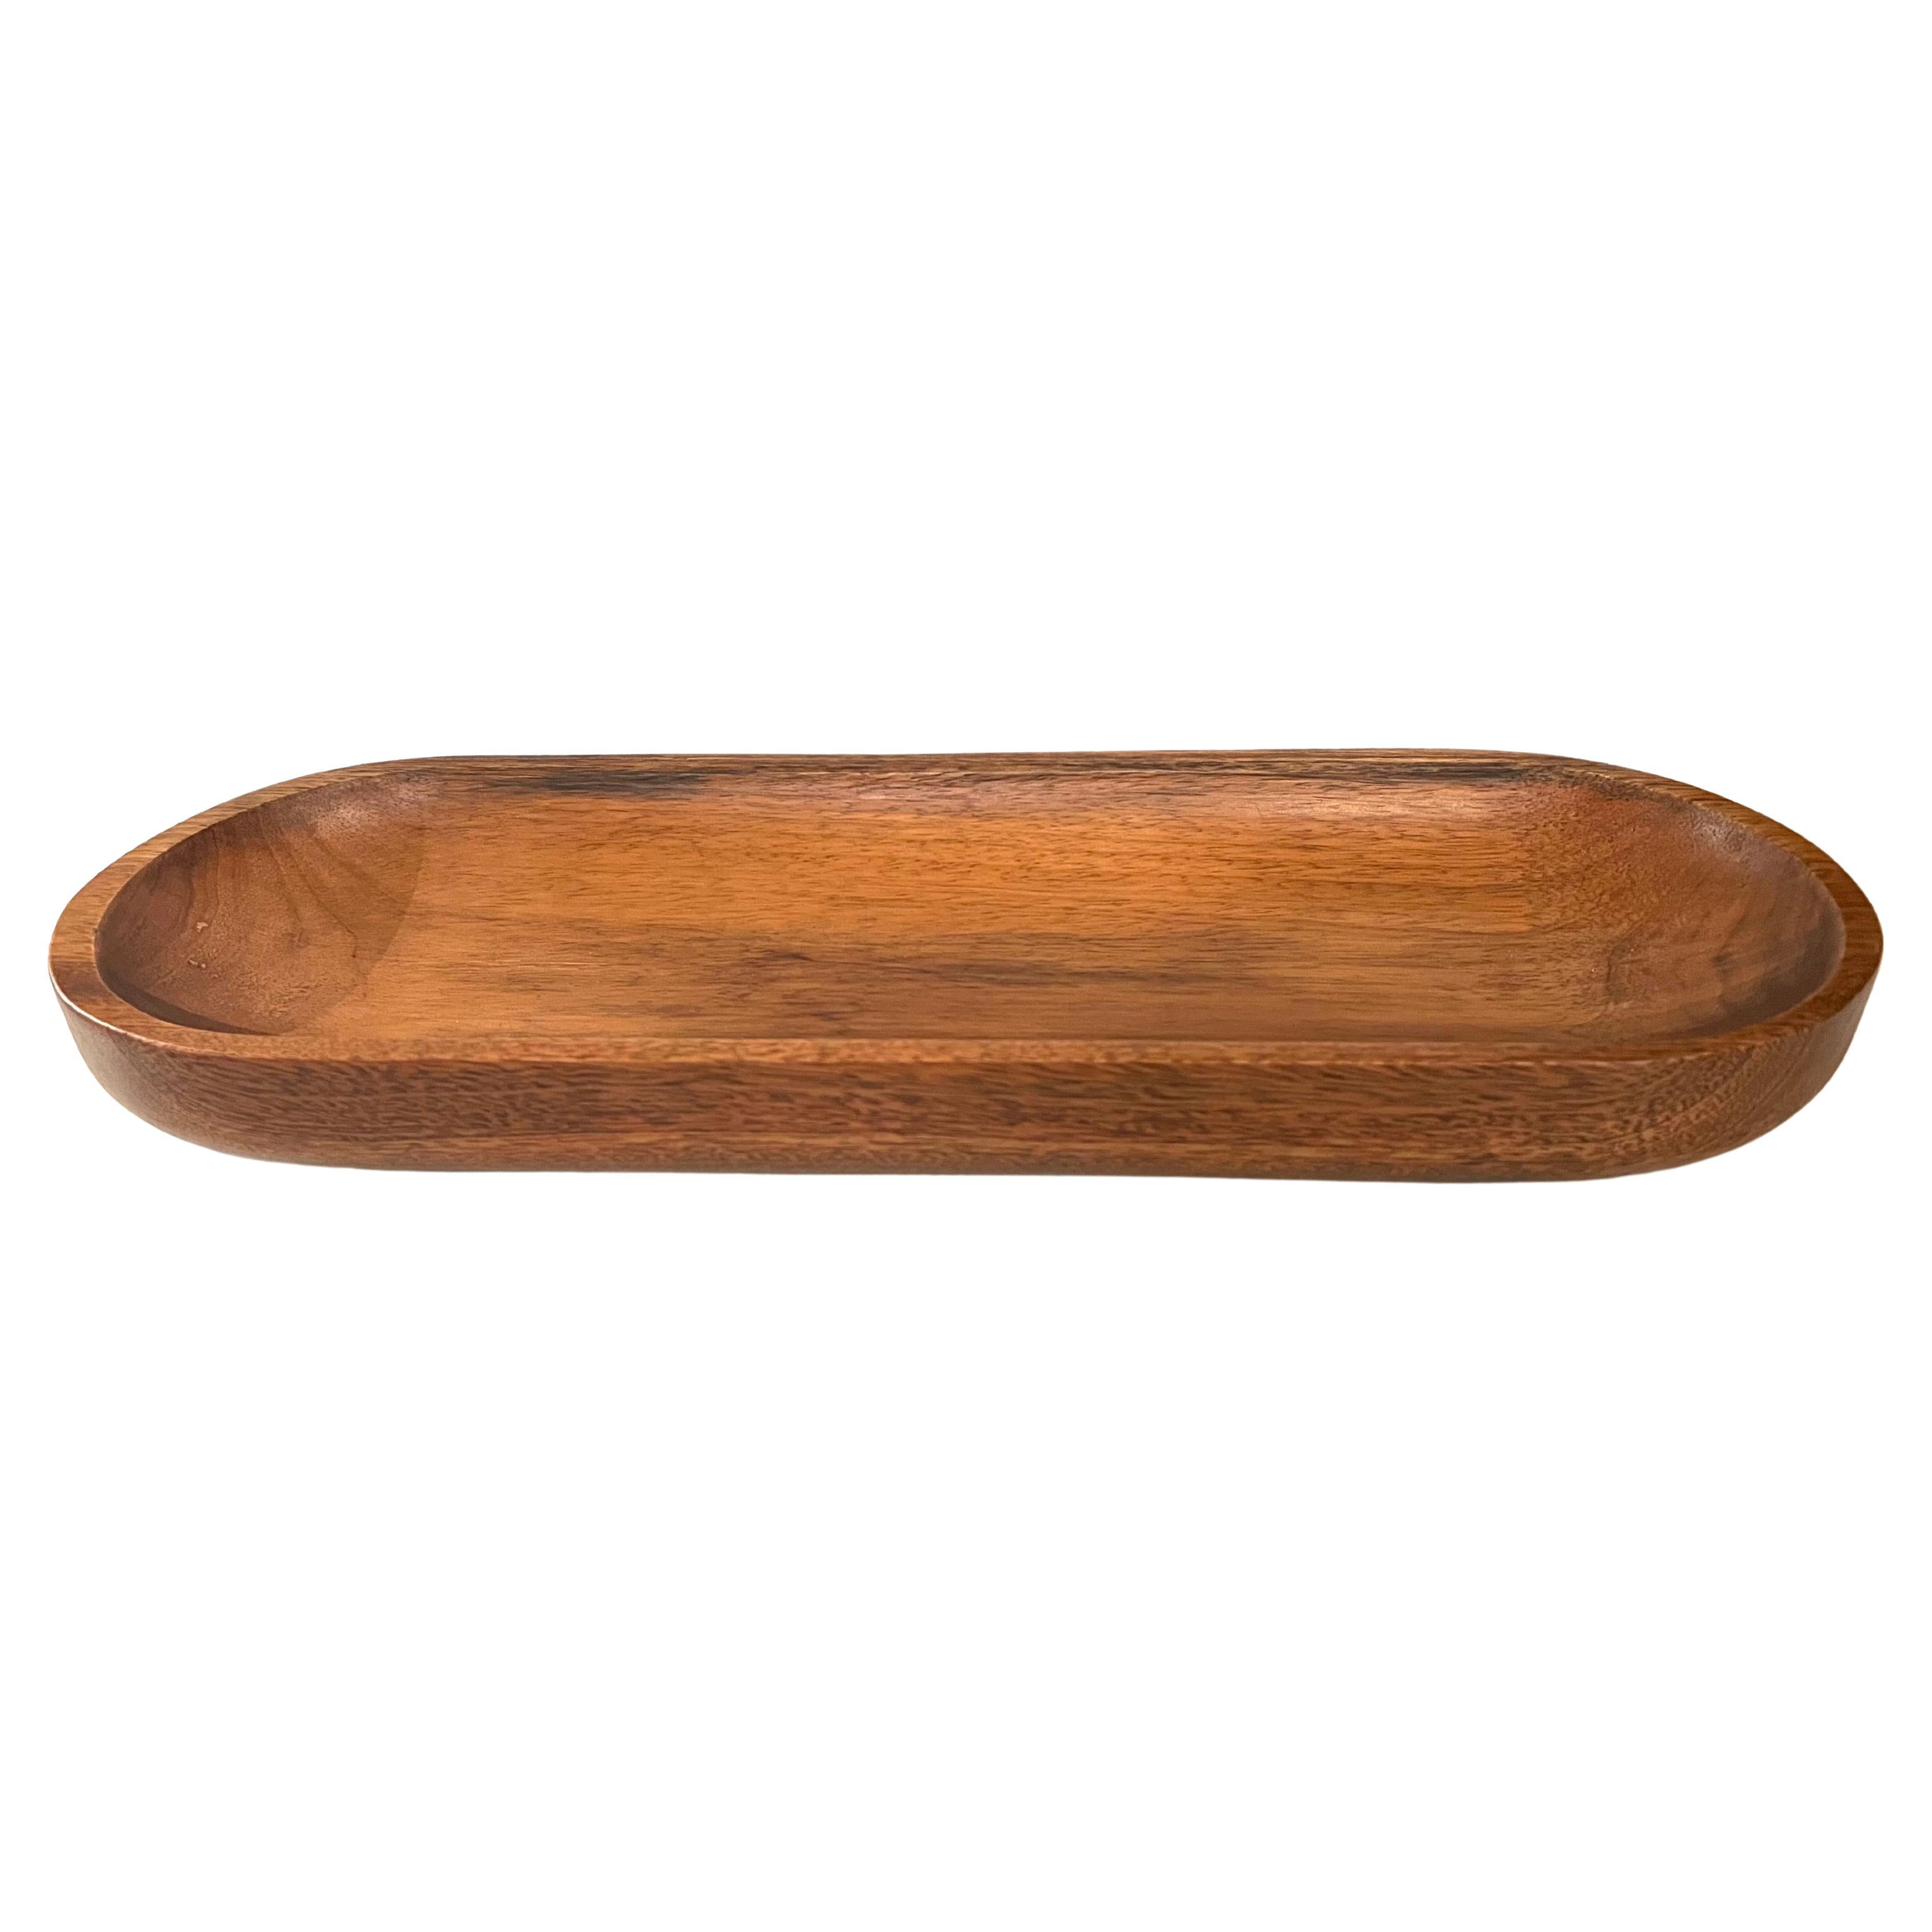 American Walnut Massive Oval Large Bowl  In Excellent Condition For Sale In San Diego, CA